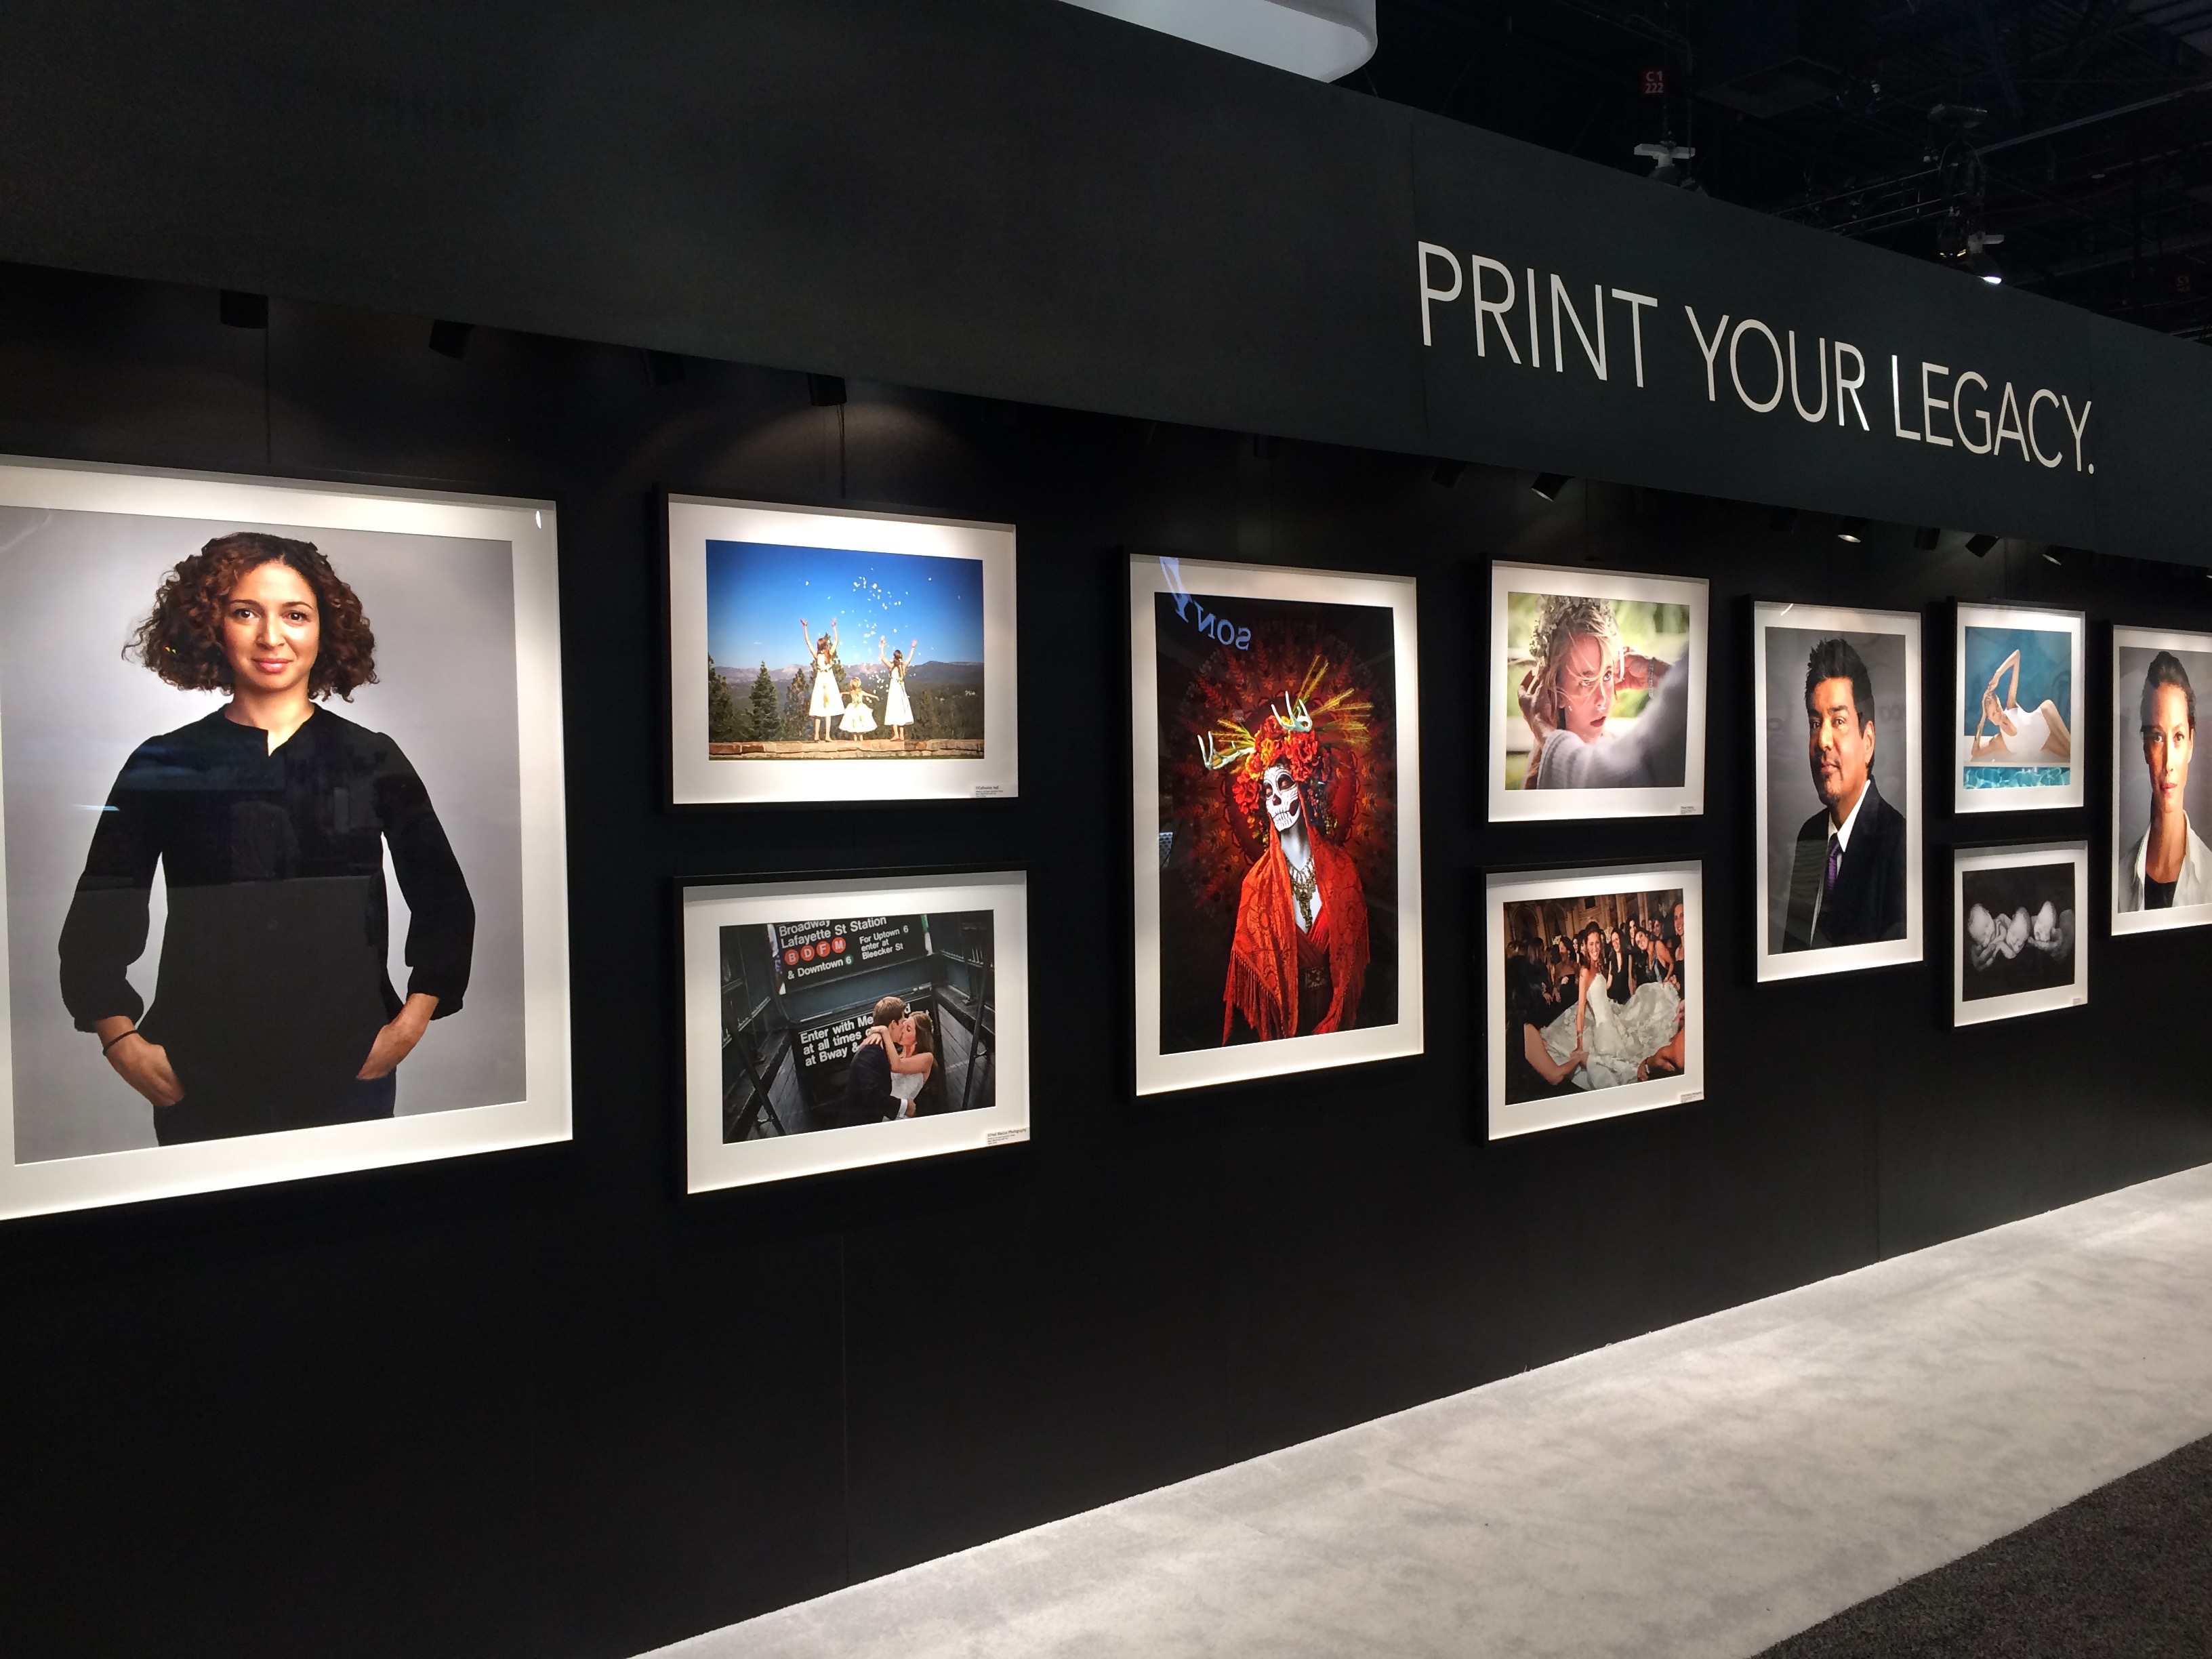 Professional Prints on display at the Wedding and Portrait Photography Expo in Las Vegas 2017